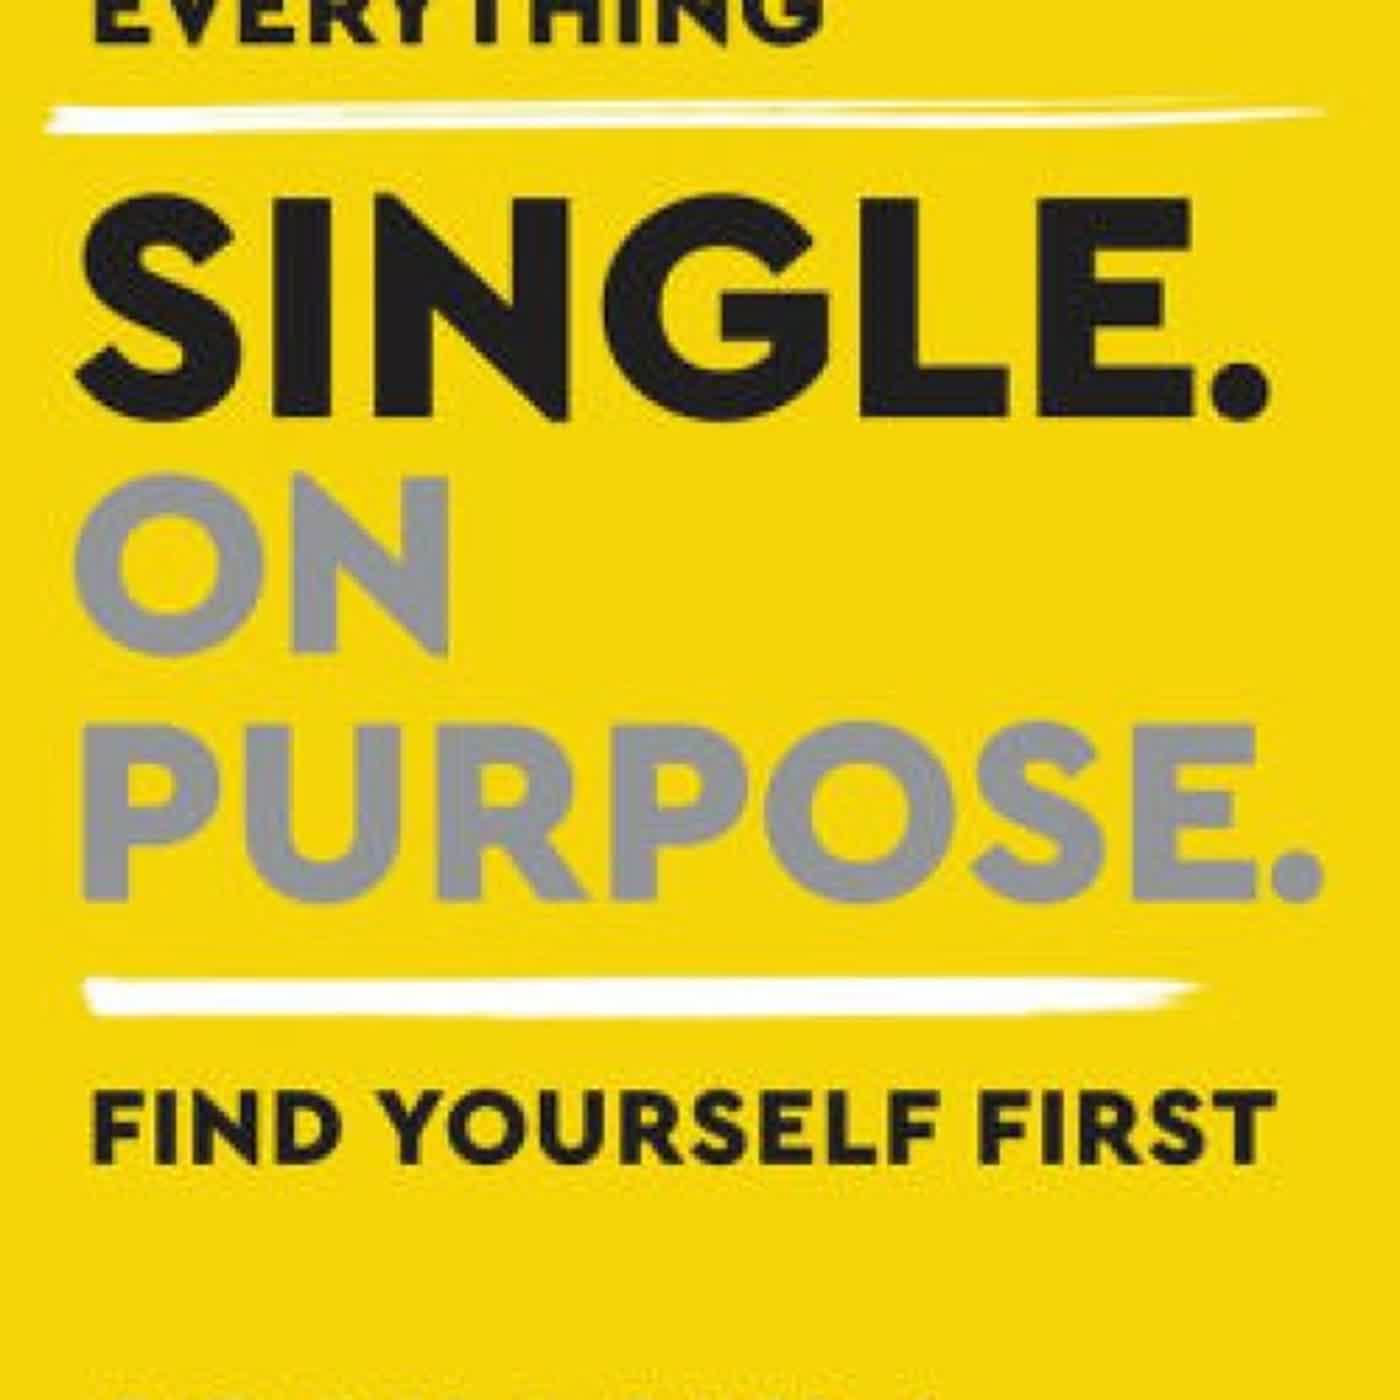 Single On Purpose: Redefine Everything. Find Yourself First. by John Kim on Ipad